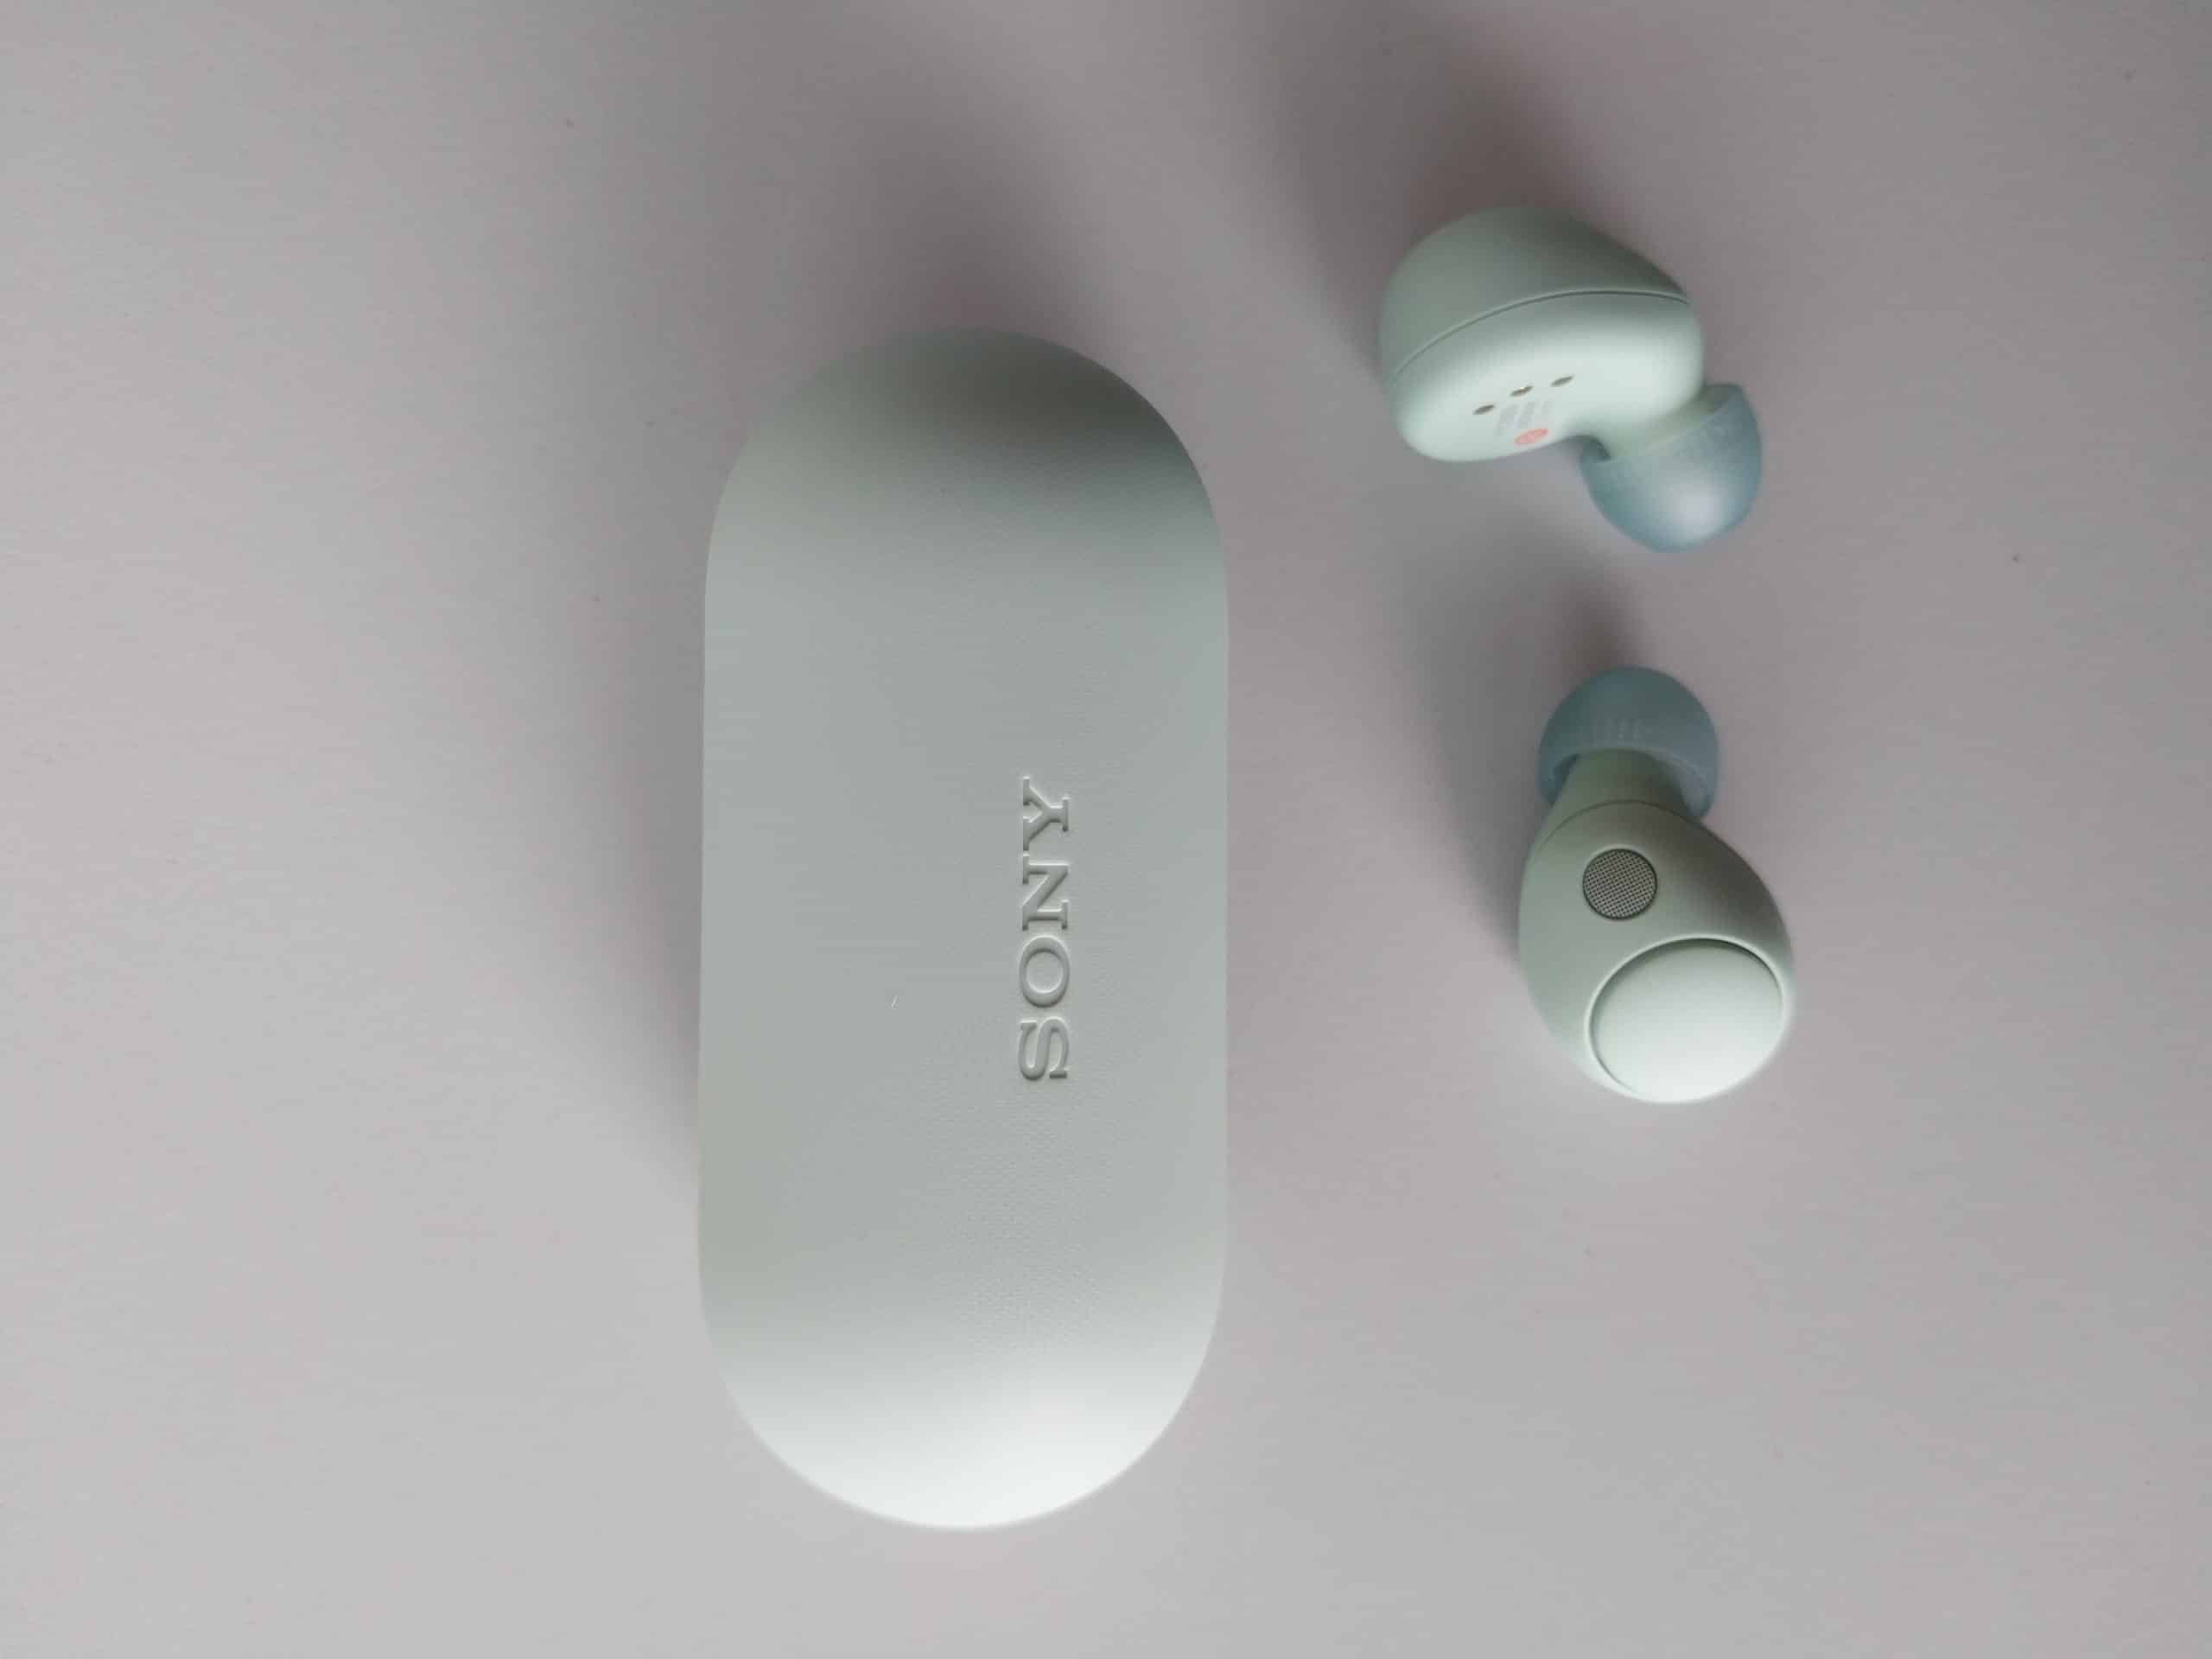 Sony announces the new WF-C700N truly wireless noise cancelling earbuds